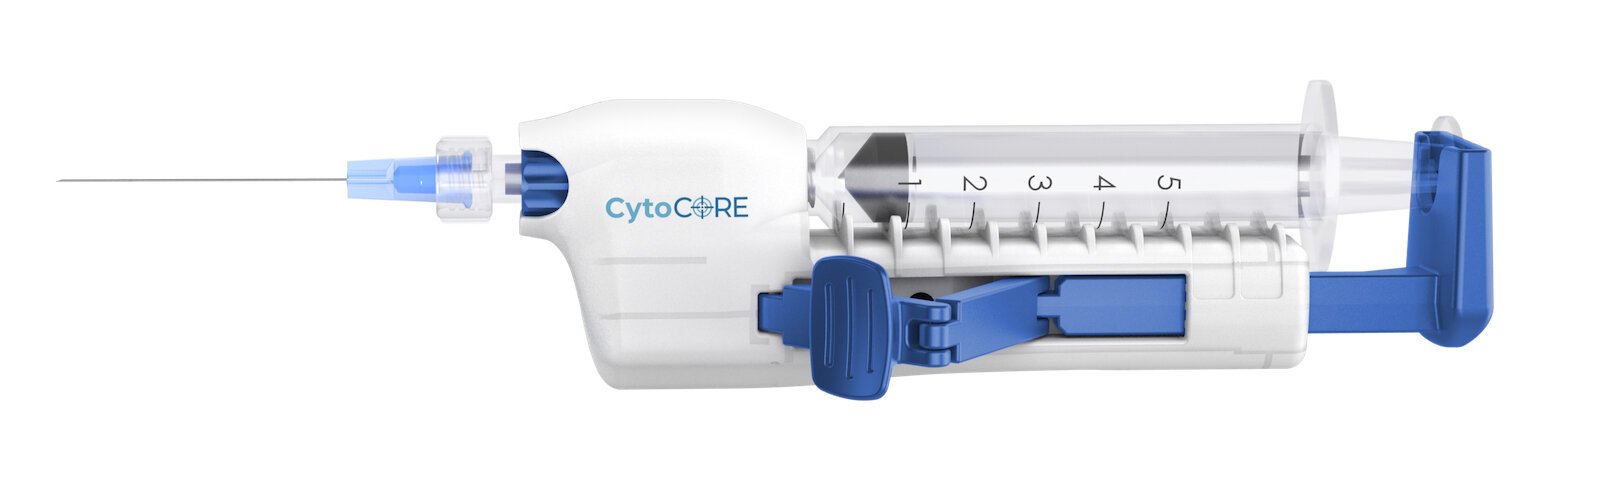 The hand-held needle biopsy device called CytoCore.